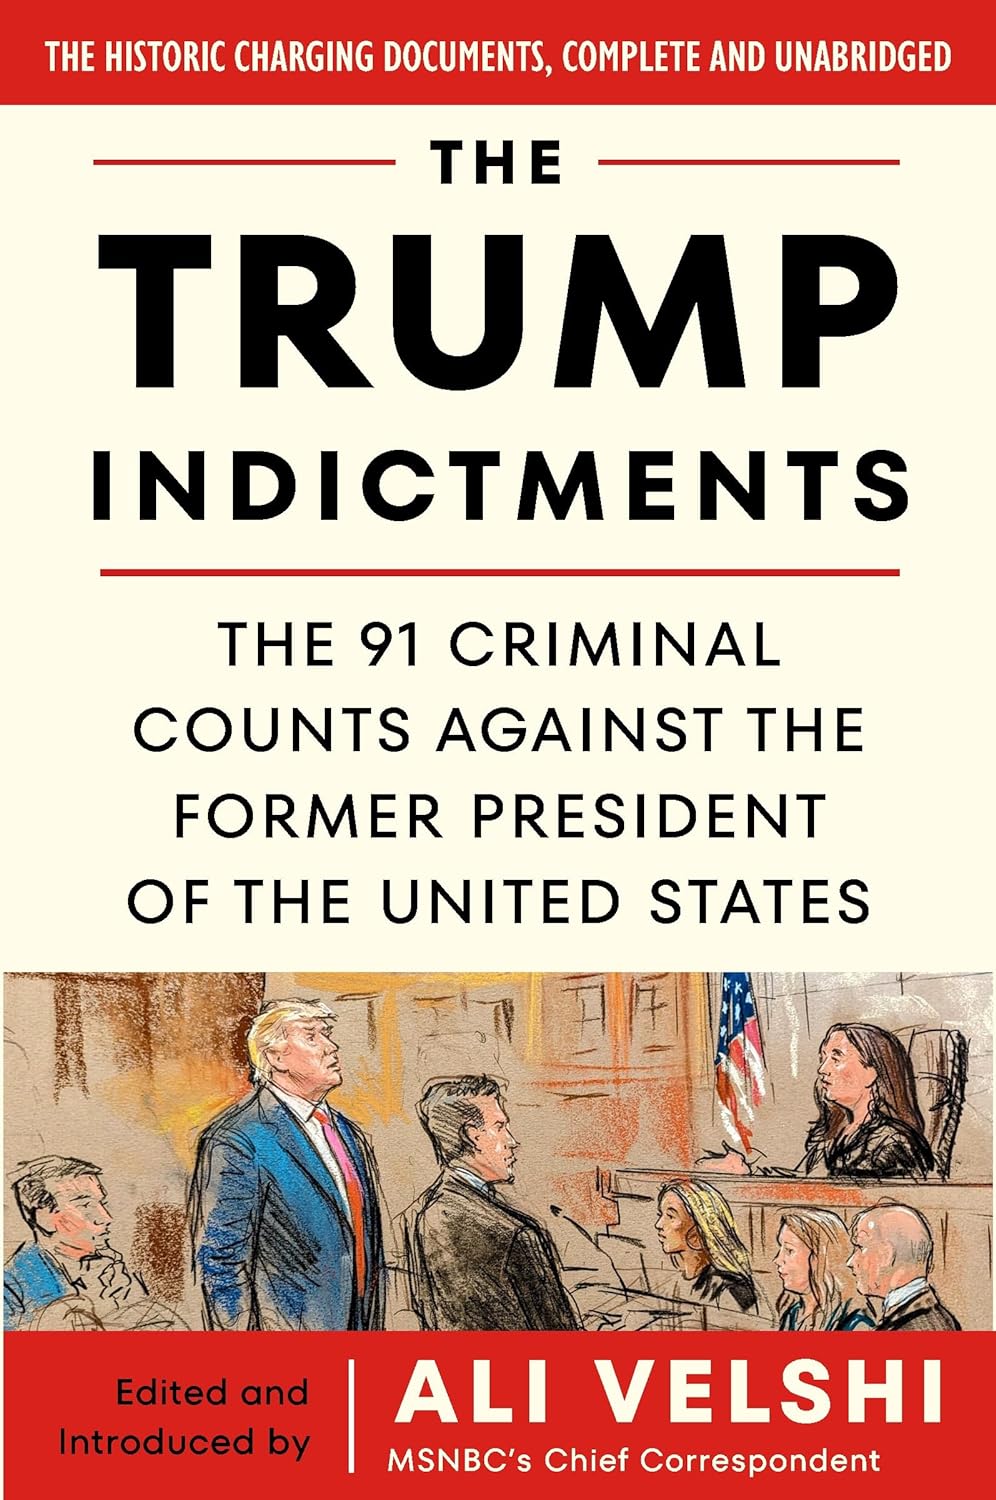 The Trump Indictments The 91 Criminal Counts Against the Former President of the United States - SureShot Books Publishing LLC